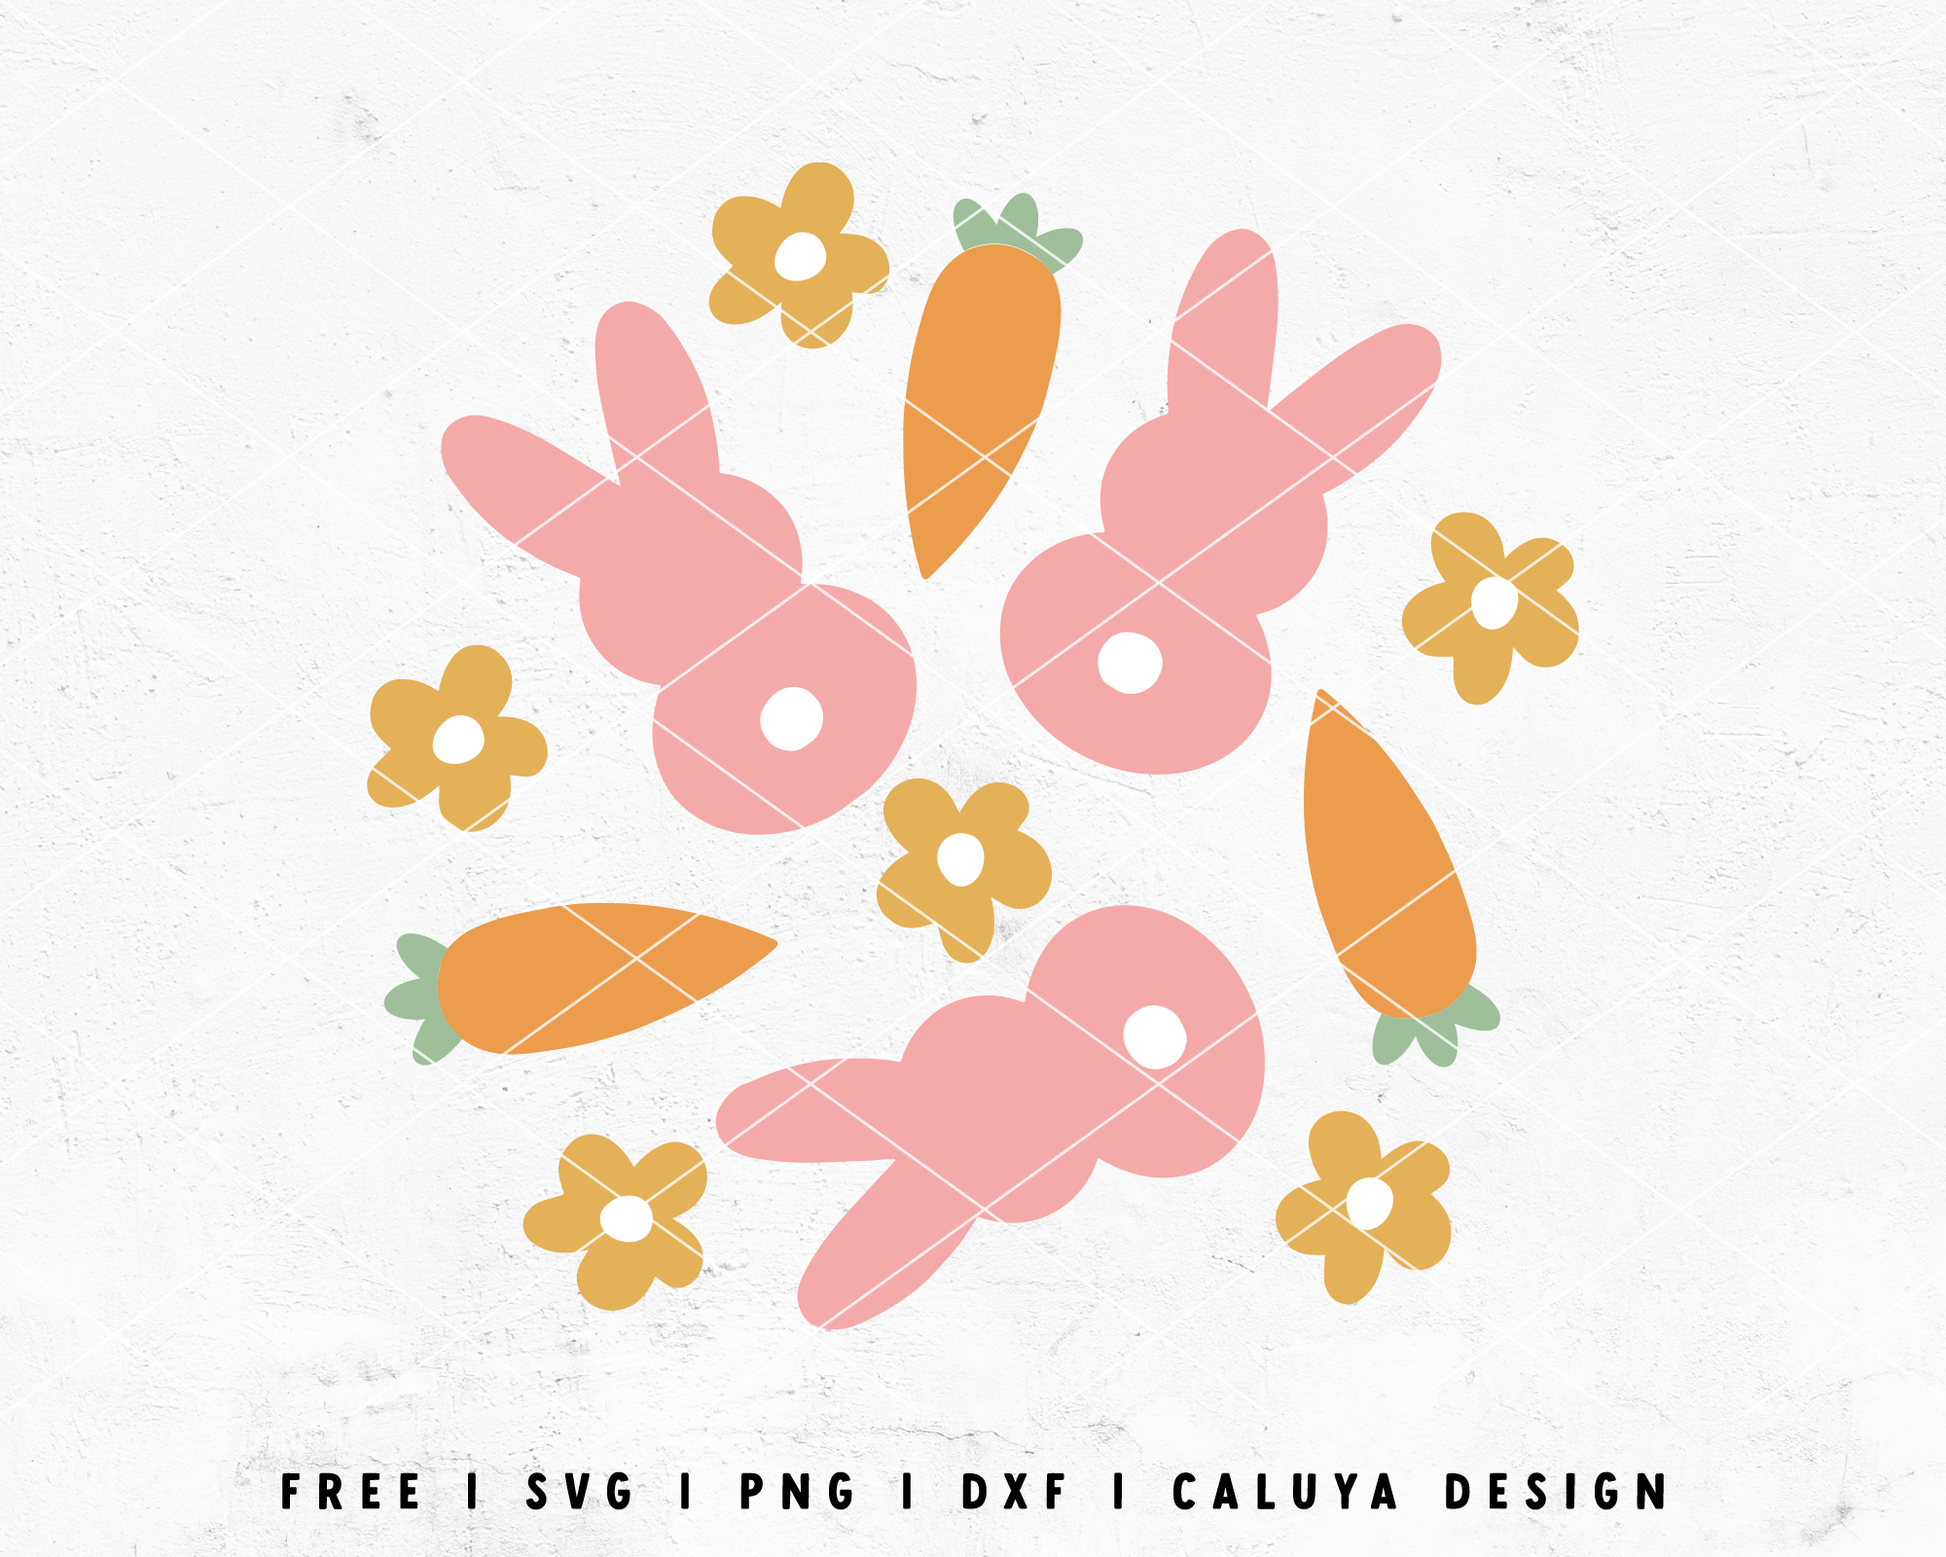 FREE Easter Bunny SVG | Bunny Flower SVG | Carrot SVG Cut File for Cricut, Cameo Silhouette | Free SVG Cut File